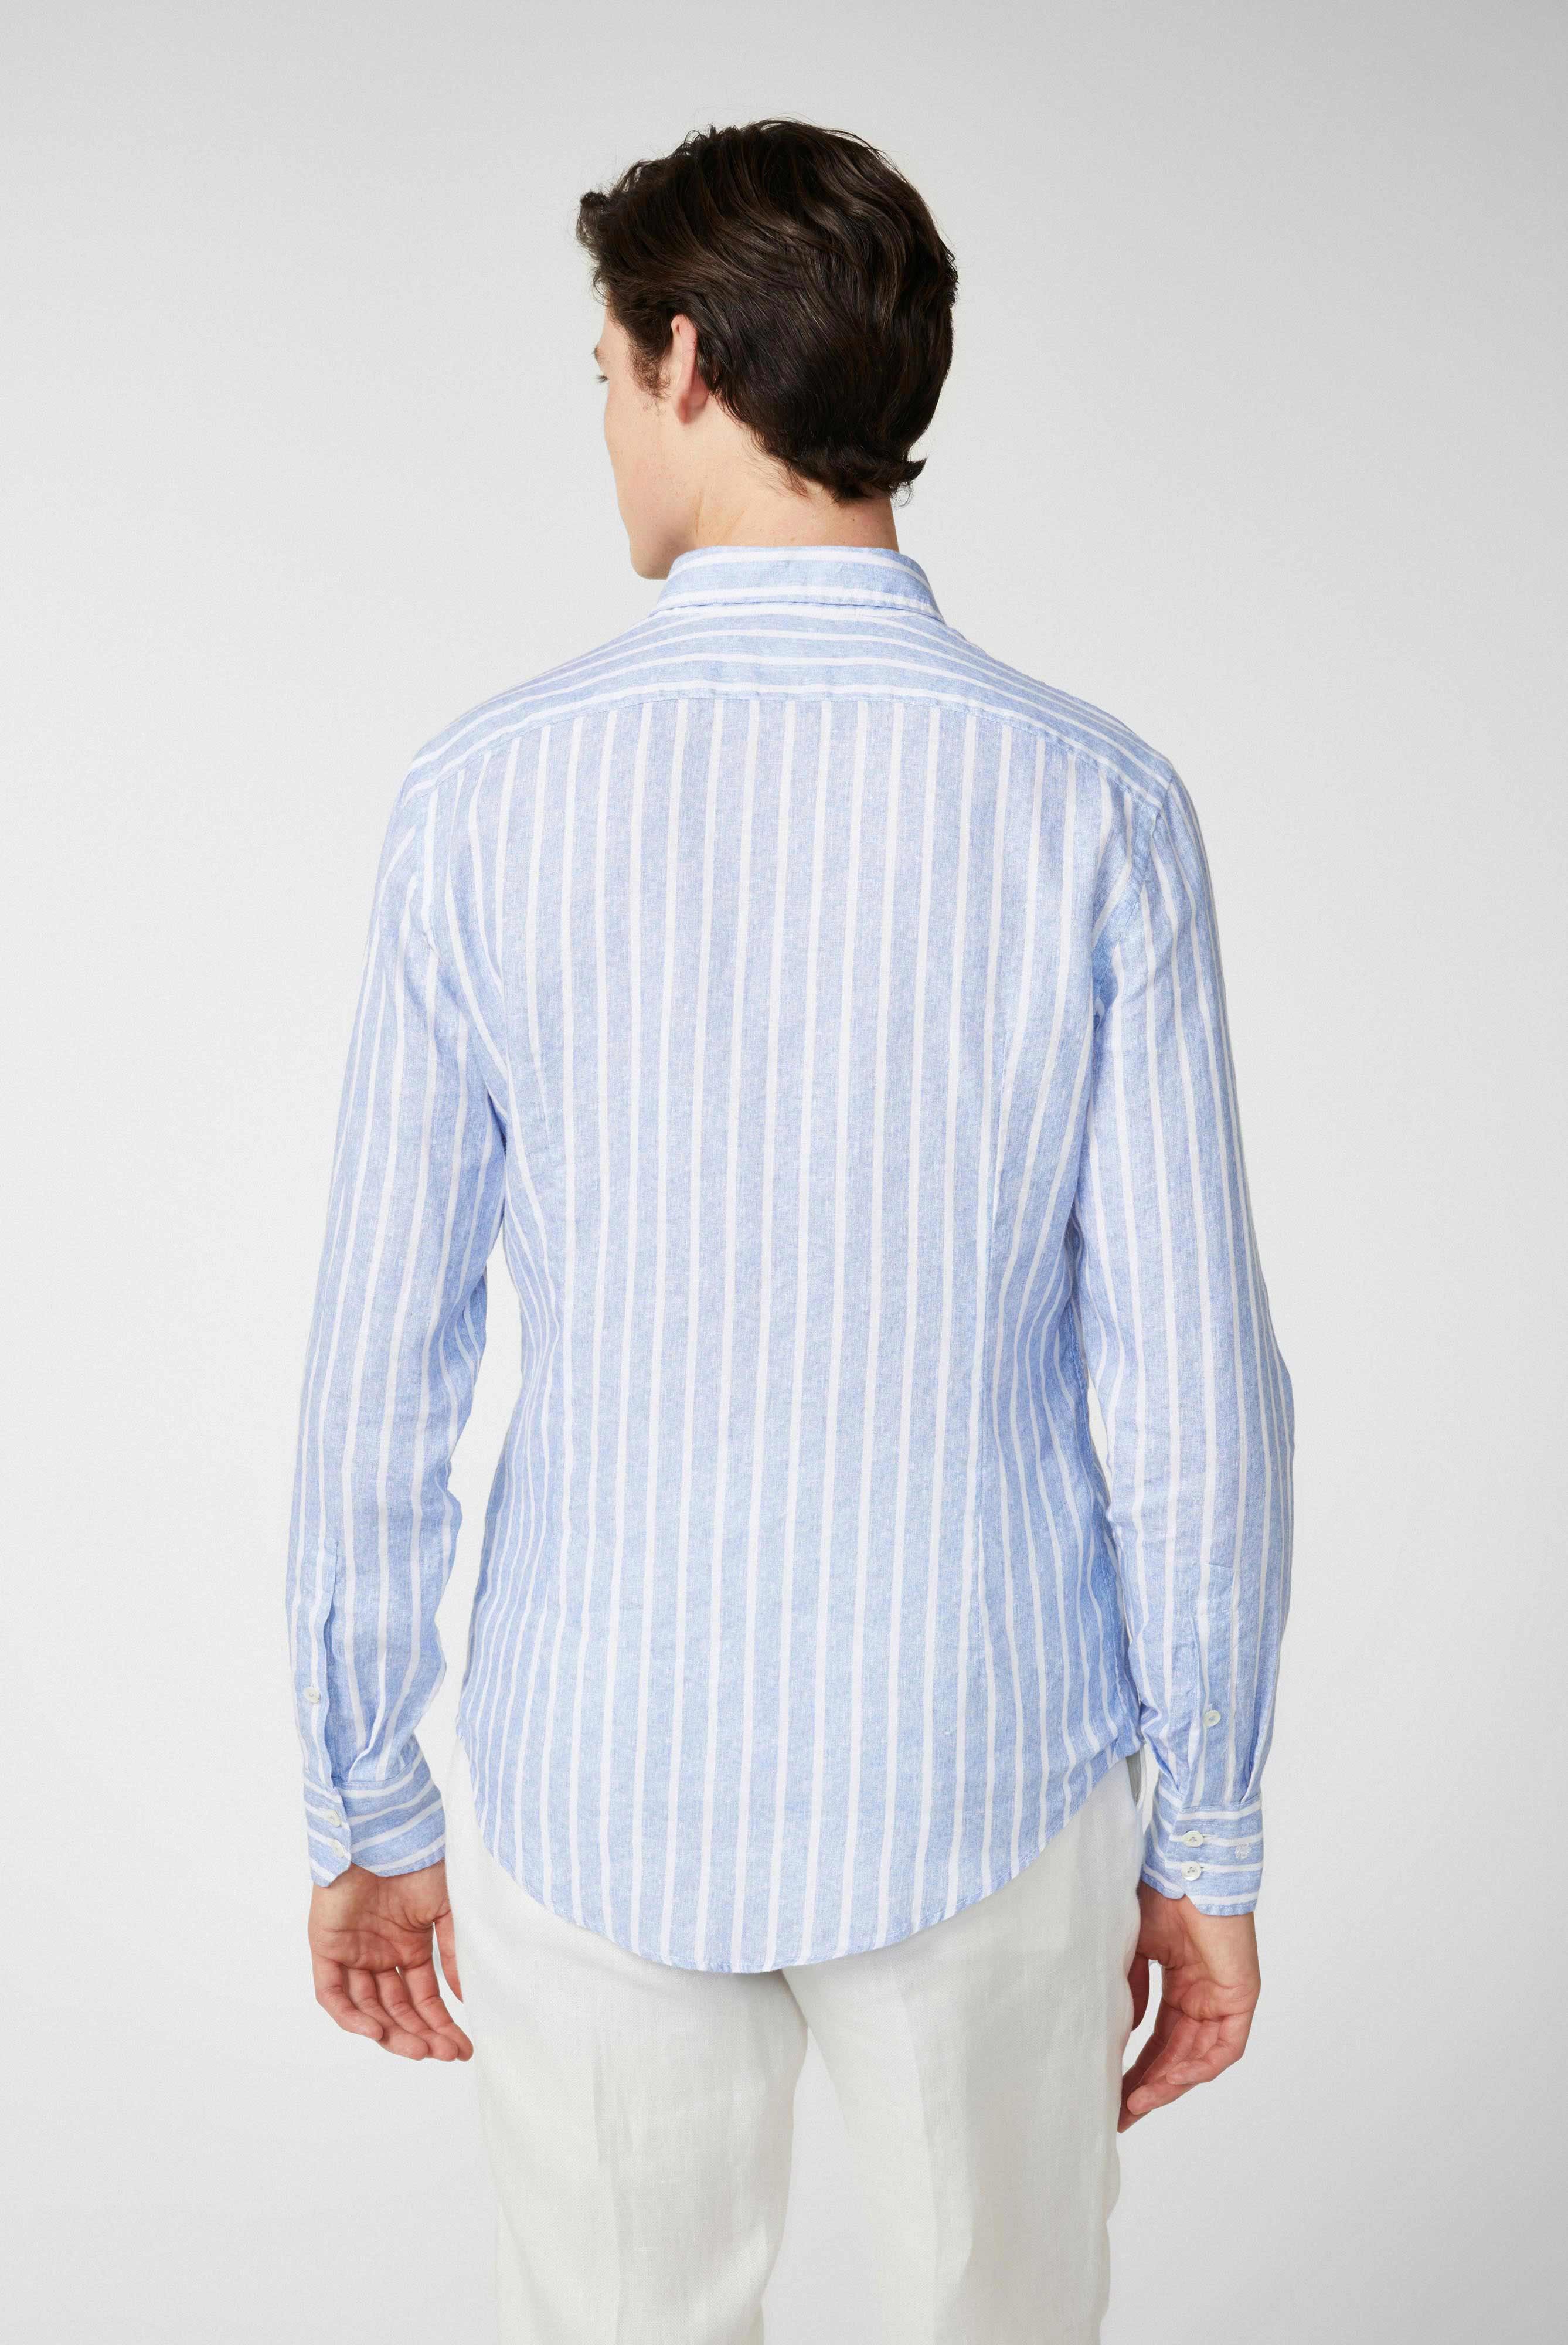 Casual Shirts+Linen button-down hem with stripe print+20.2013.MB.170238.760.40